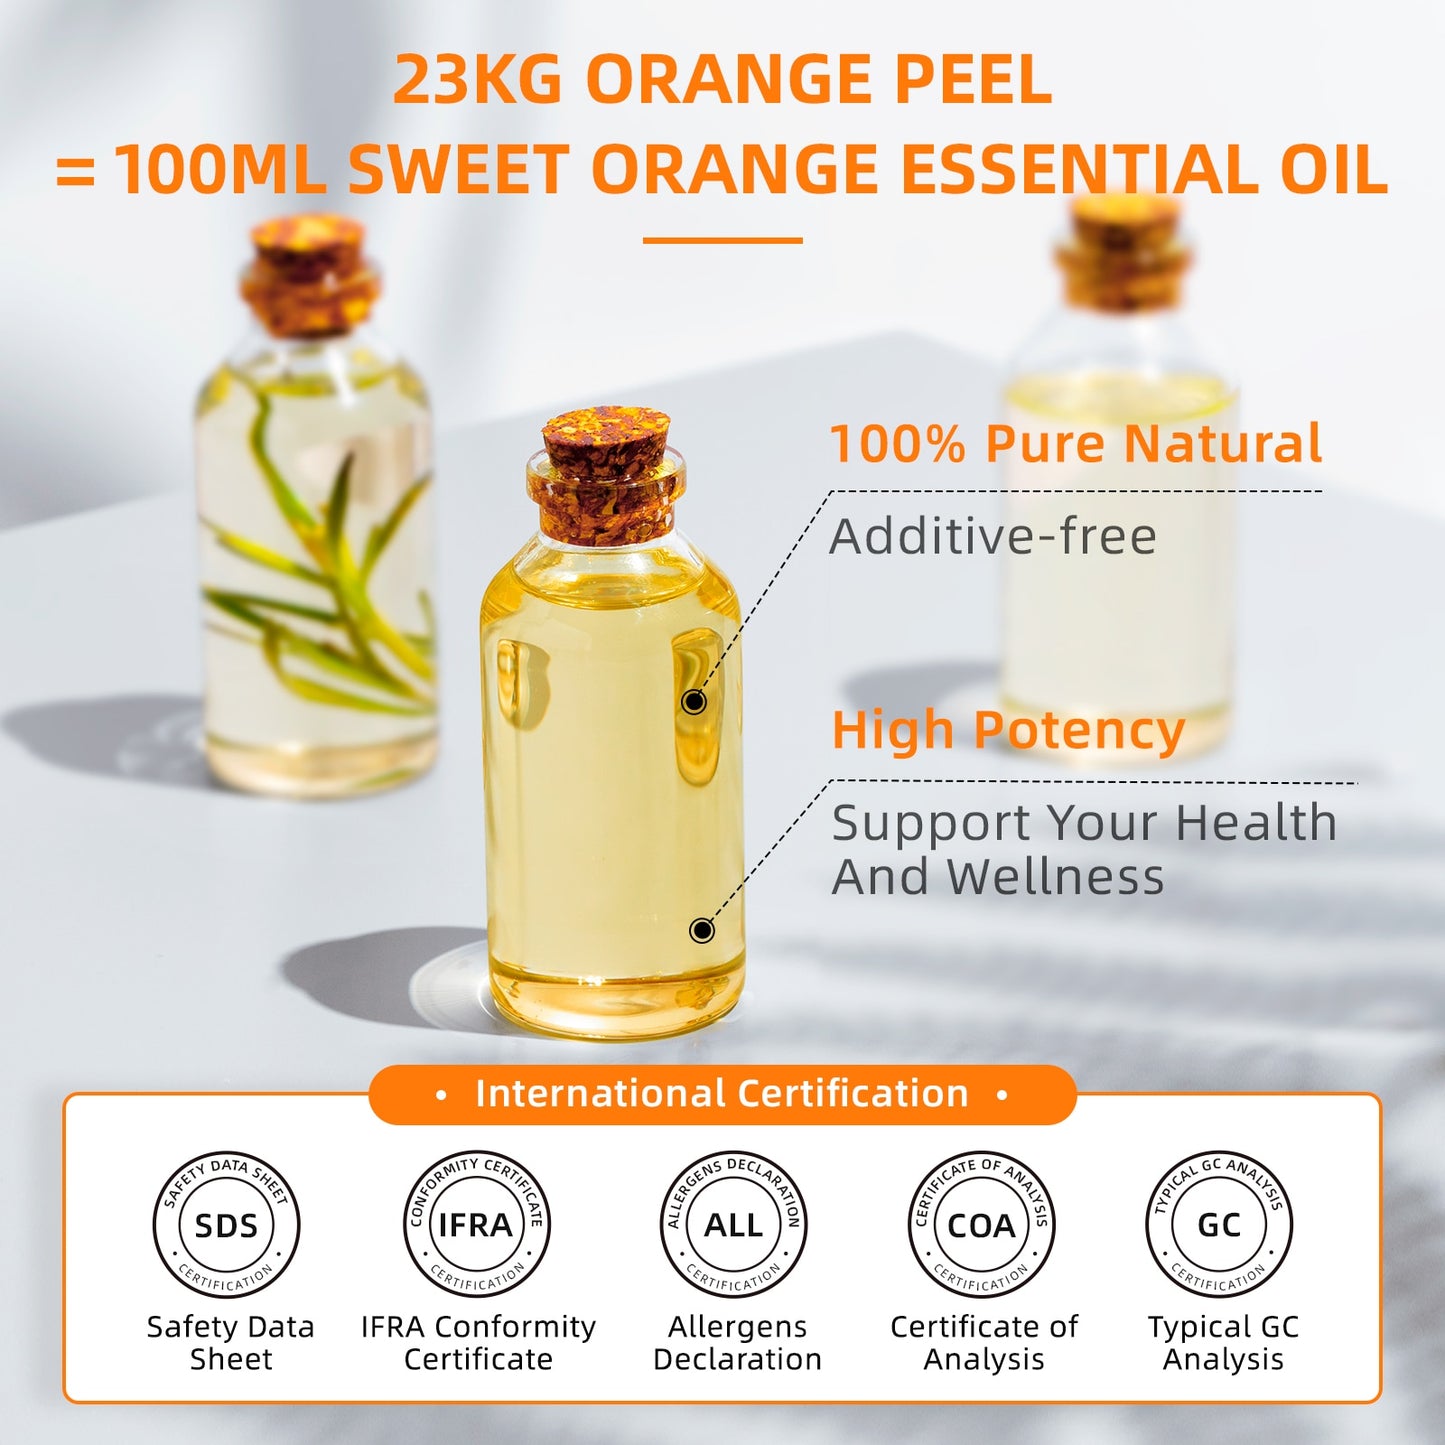 HIQILI 100ML Sweet Orange Essential Oils,100% Pure Nature for Aromatherapy | Used for Diffuser，Humidifier，Massage | Fresh air - youronestopstore23